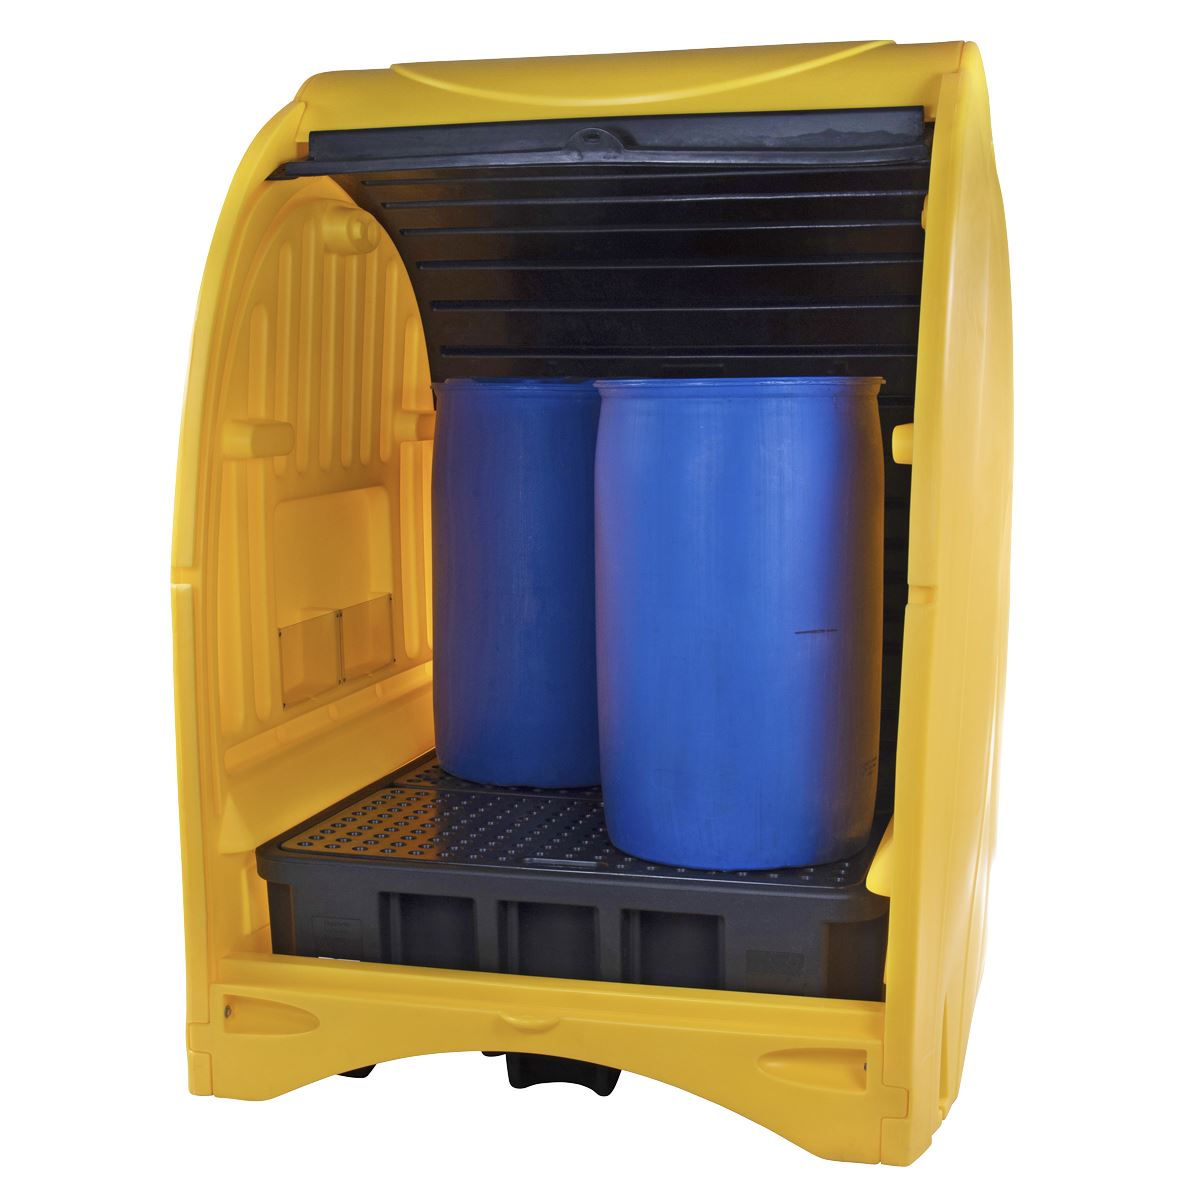 Sealey 4 Drum Spill Pallet with Hardcover 485L Capacity